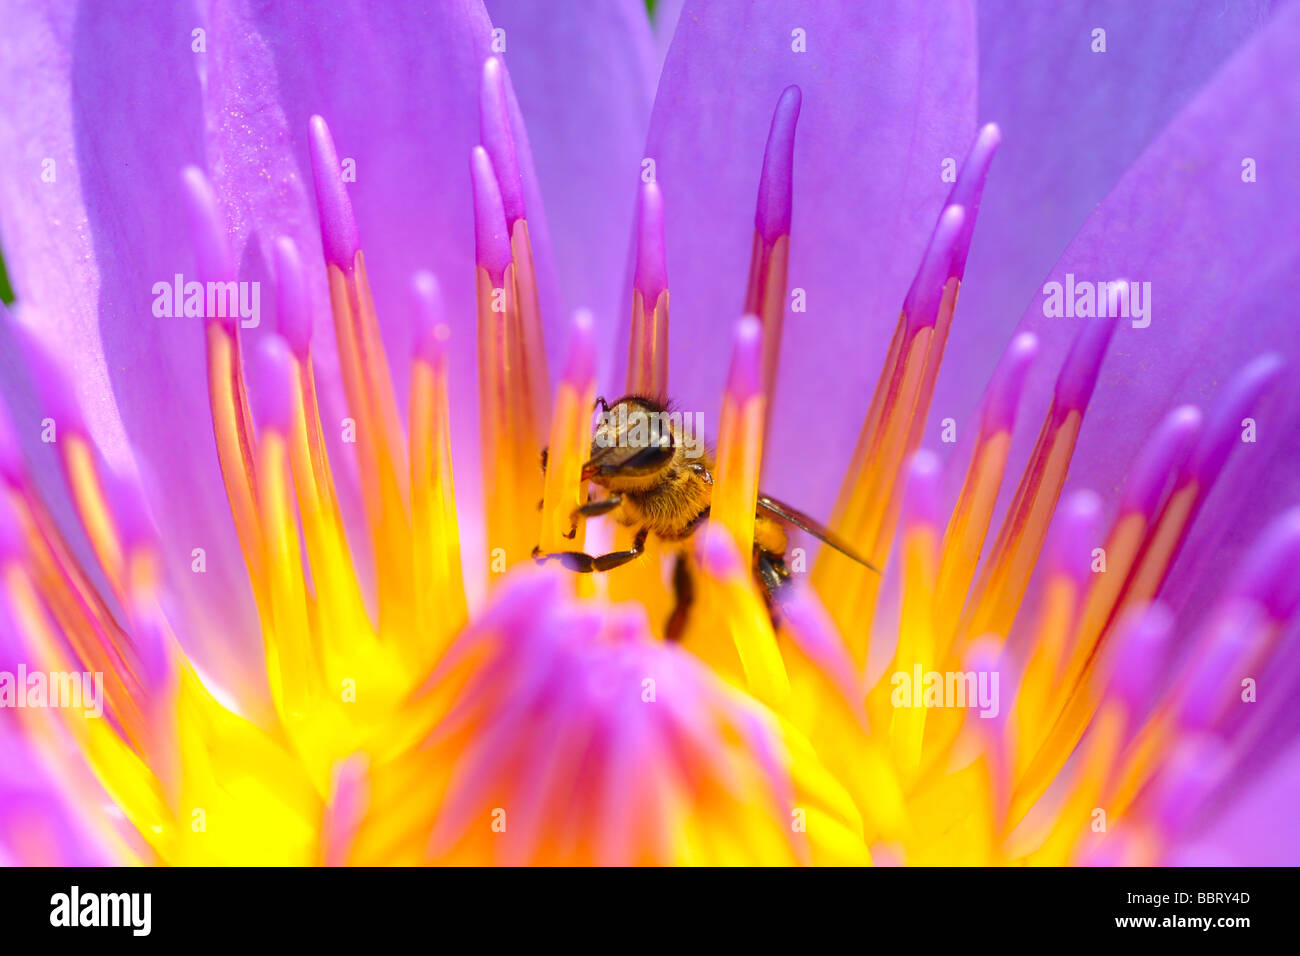 A bee on the waterlily. Outdoor natural setting in the gardern. Stock Photo